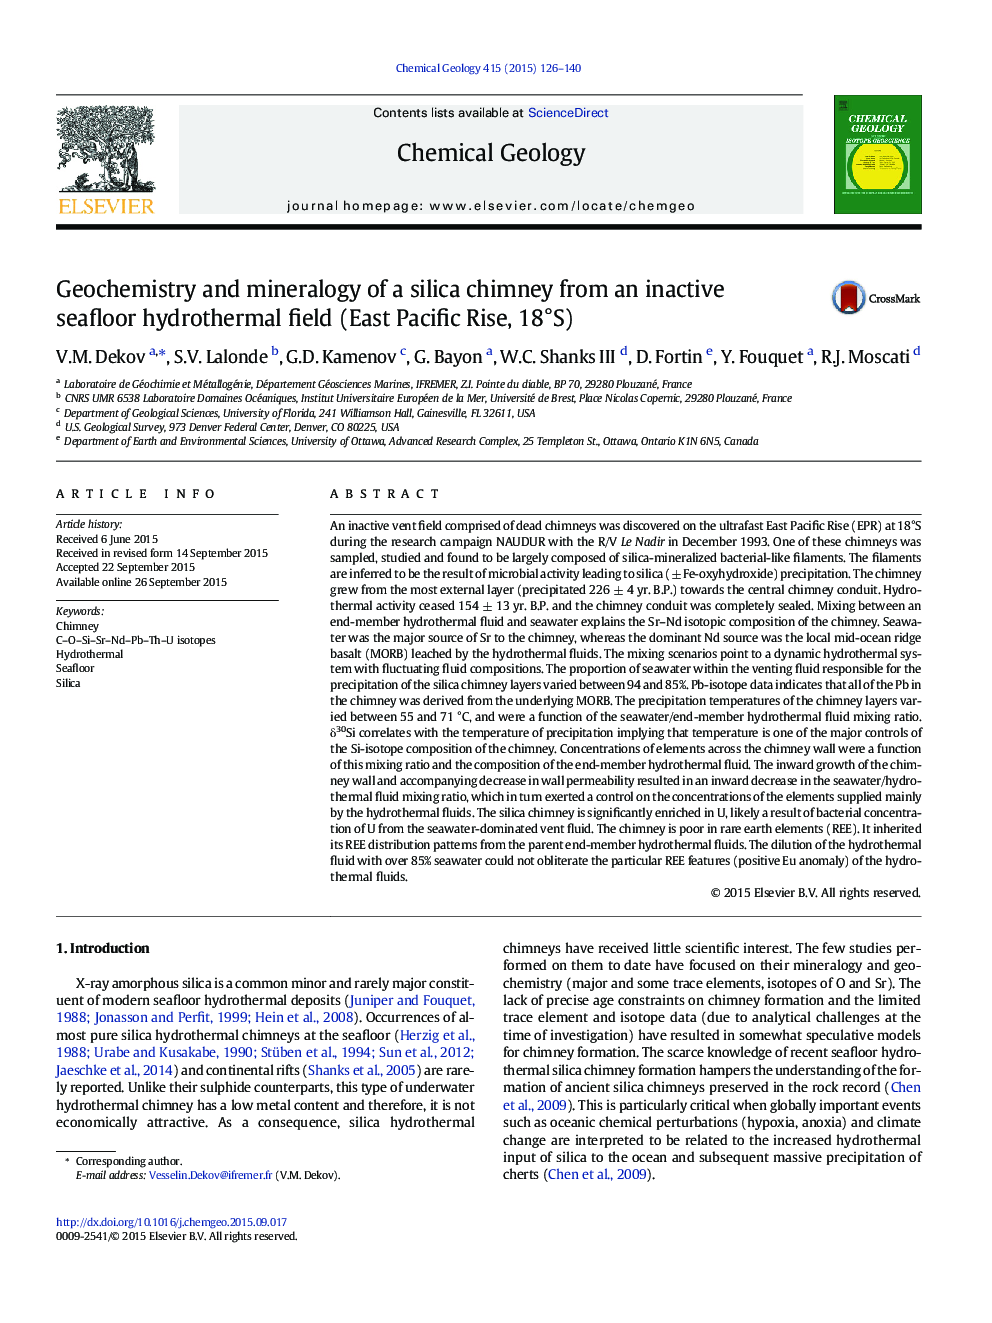 Geochemistry and mineralogy of a silica chimney from an inactive seafloor hydrothermal field (East Pacific Rise, 18Â°S)